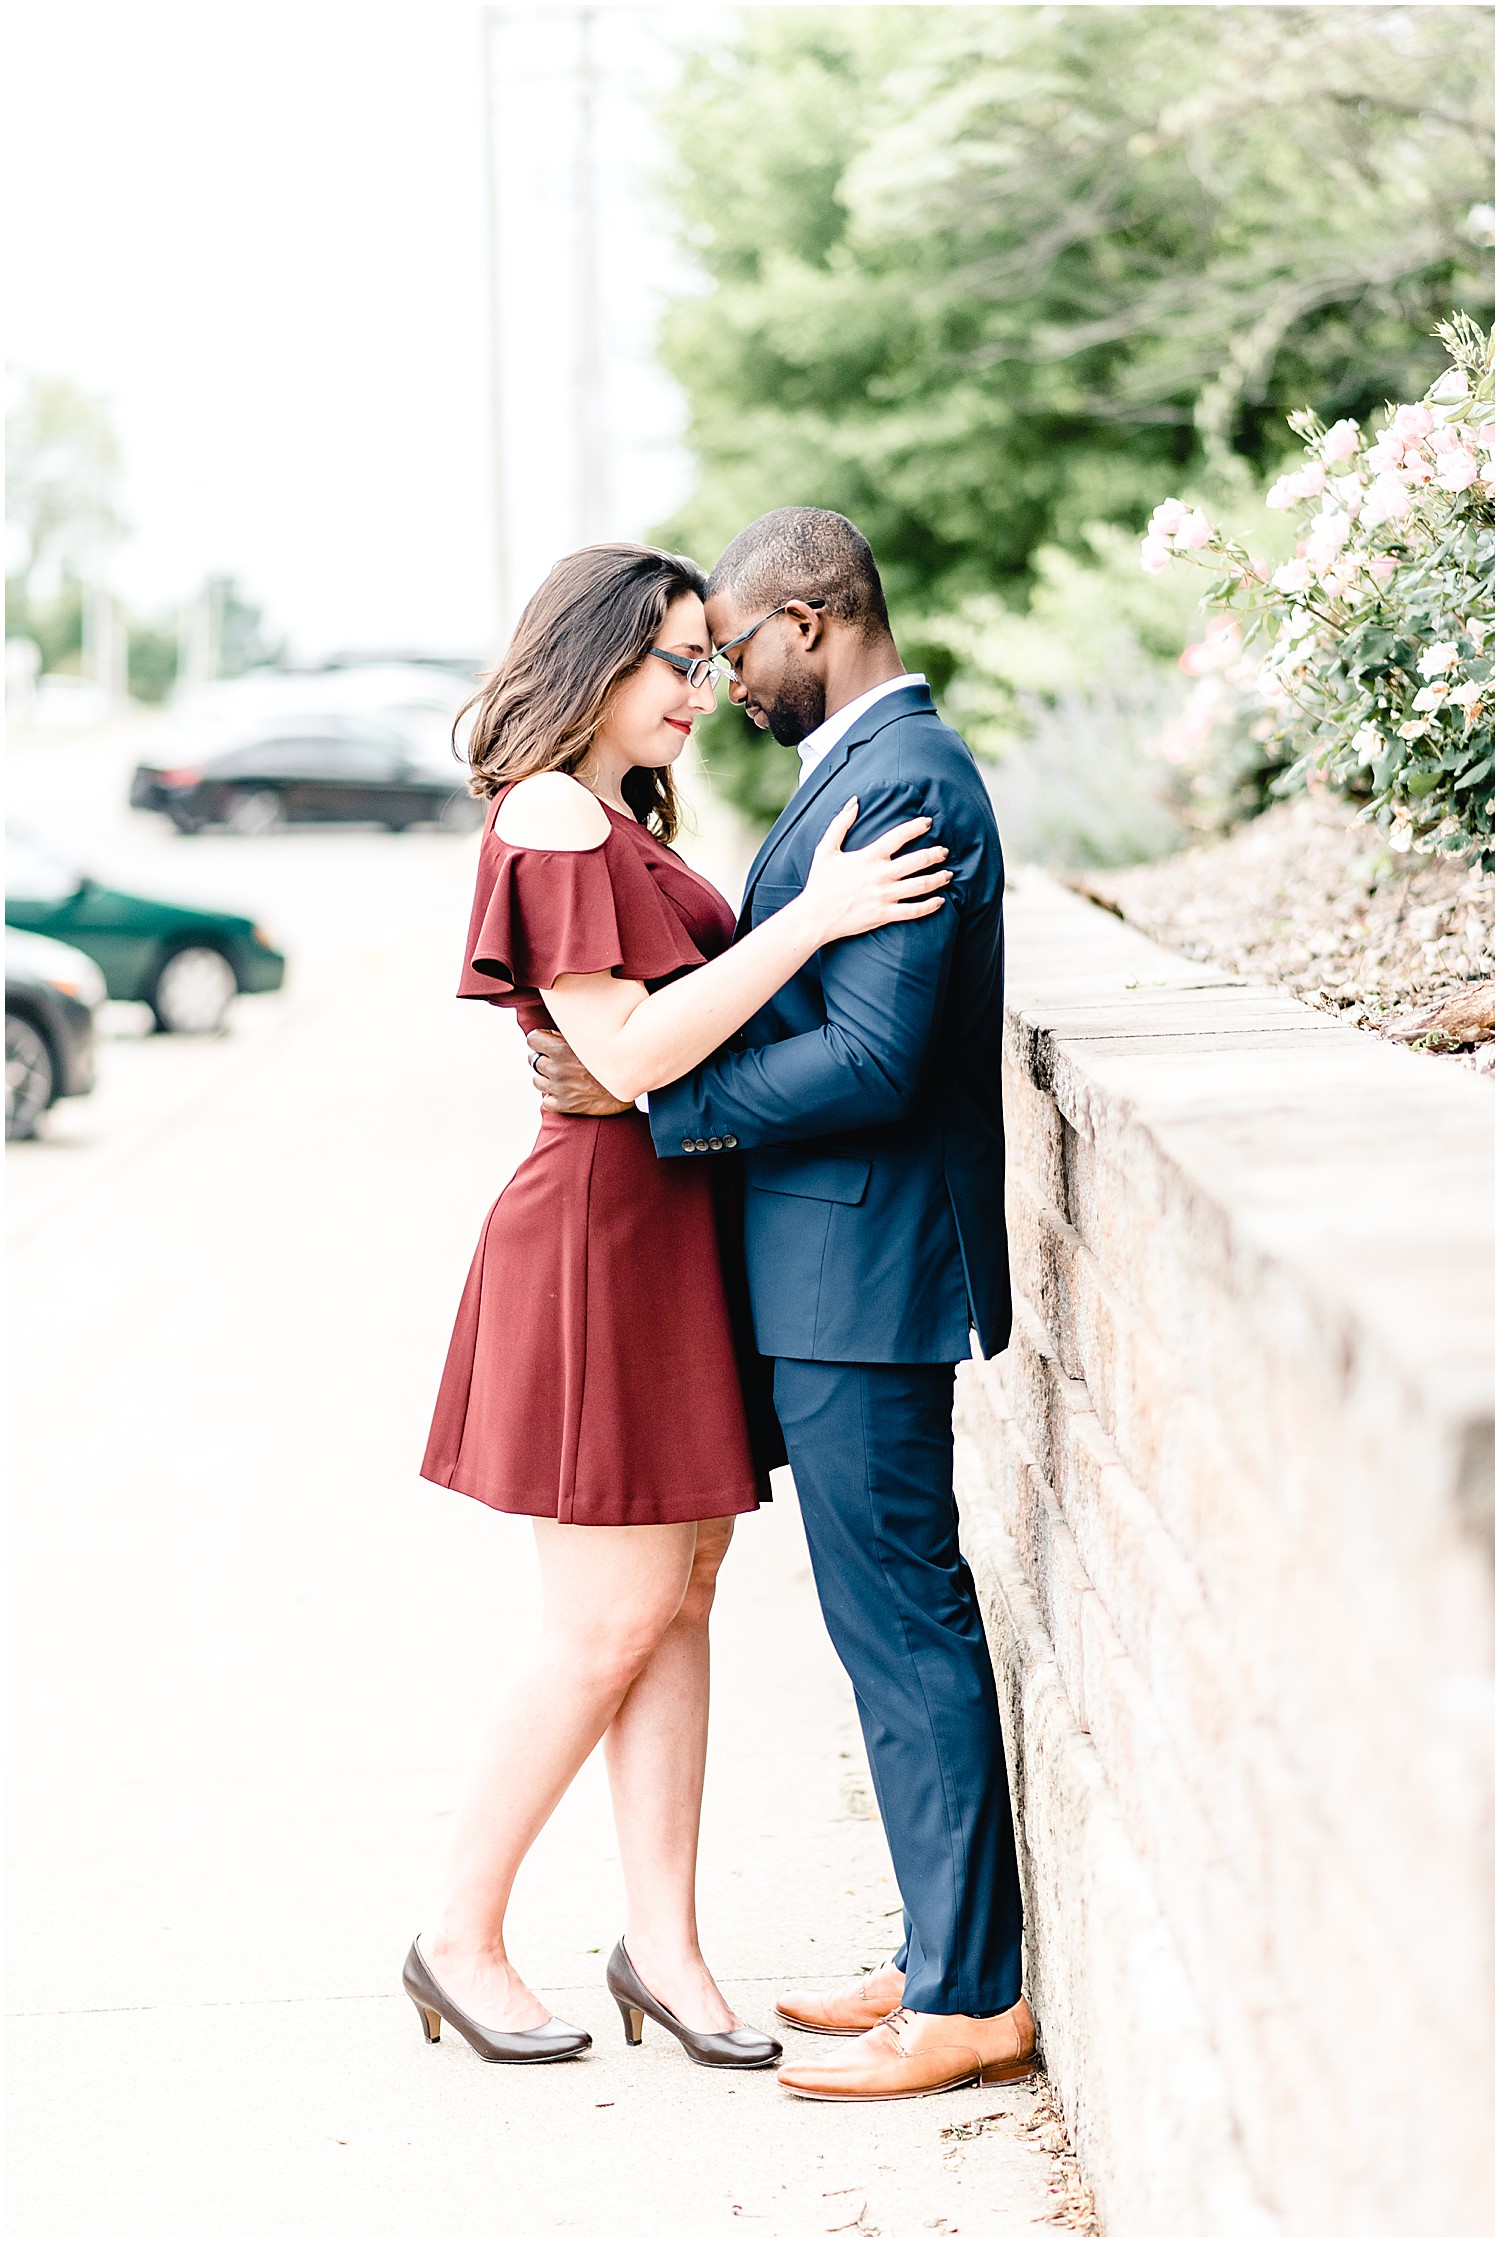 Downtown jefferson city river overlook engagement session couple standing on sidewalk